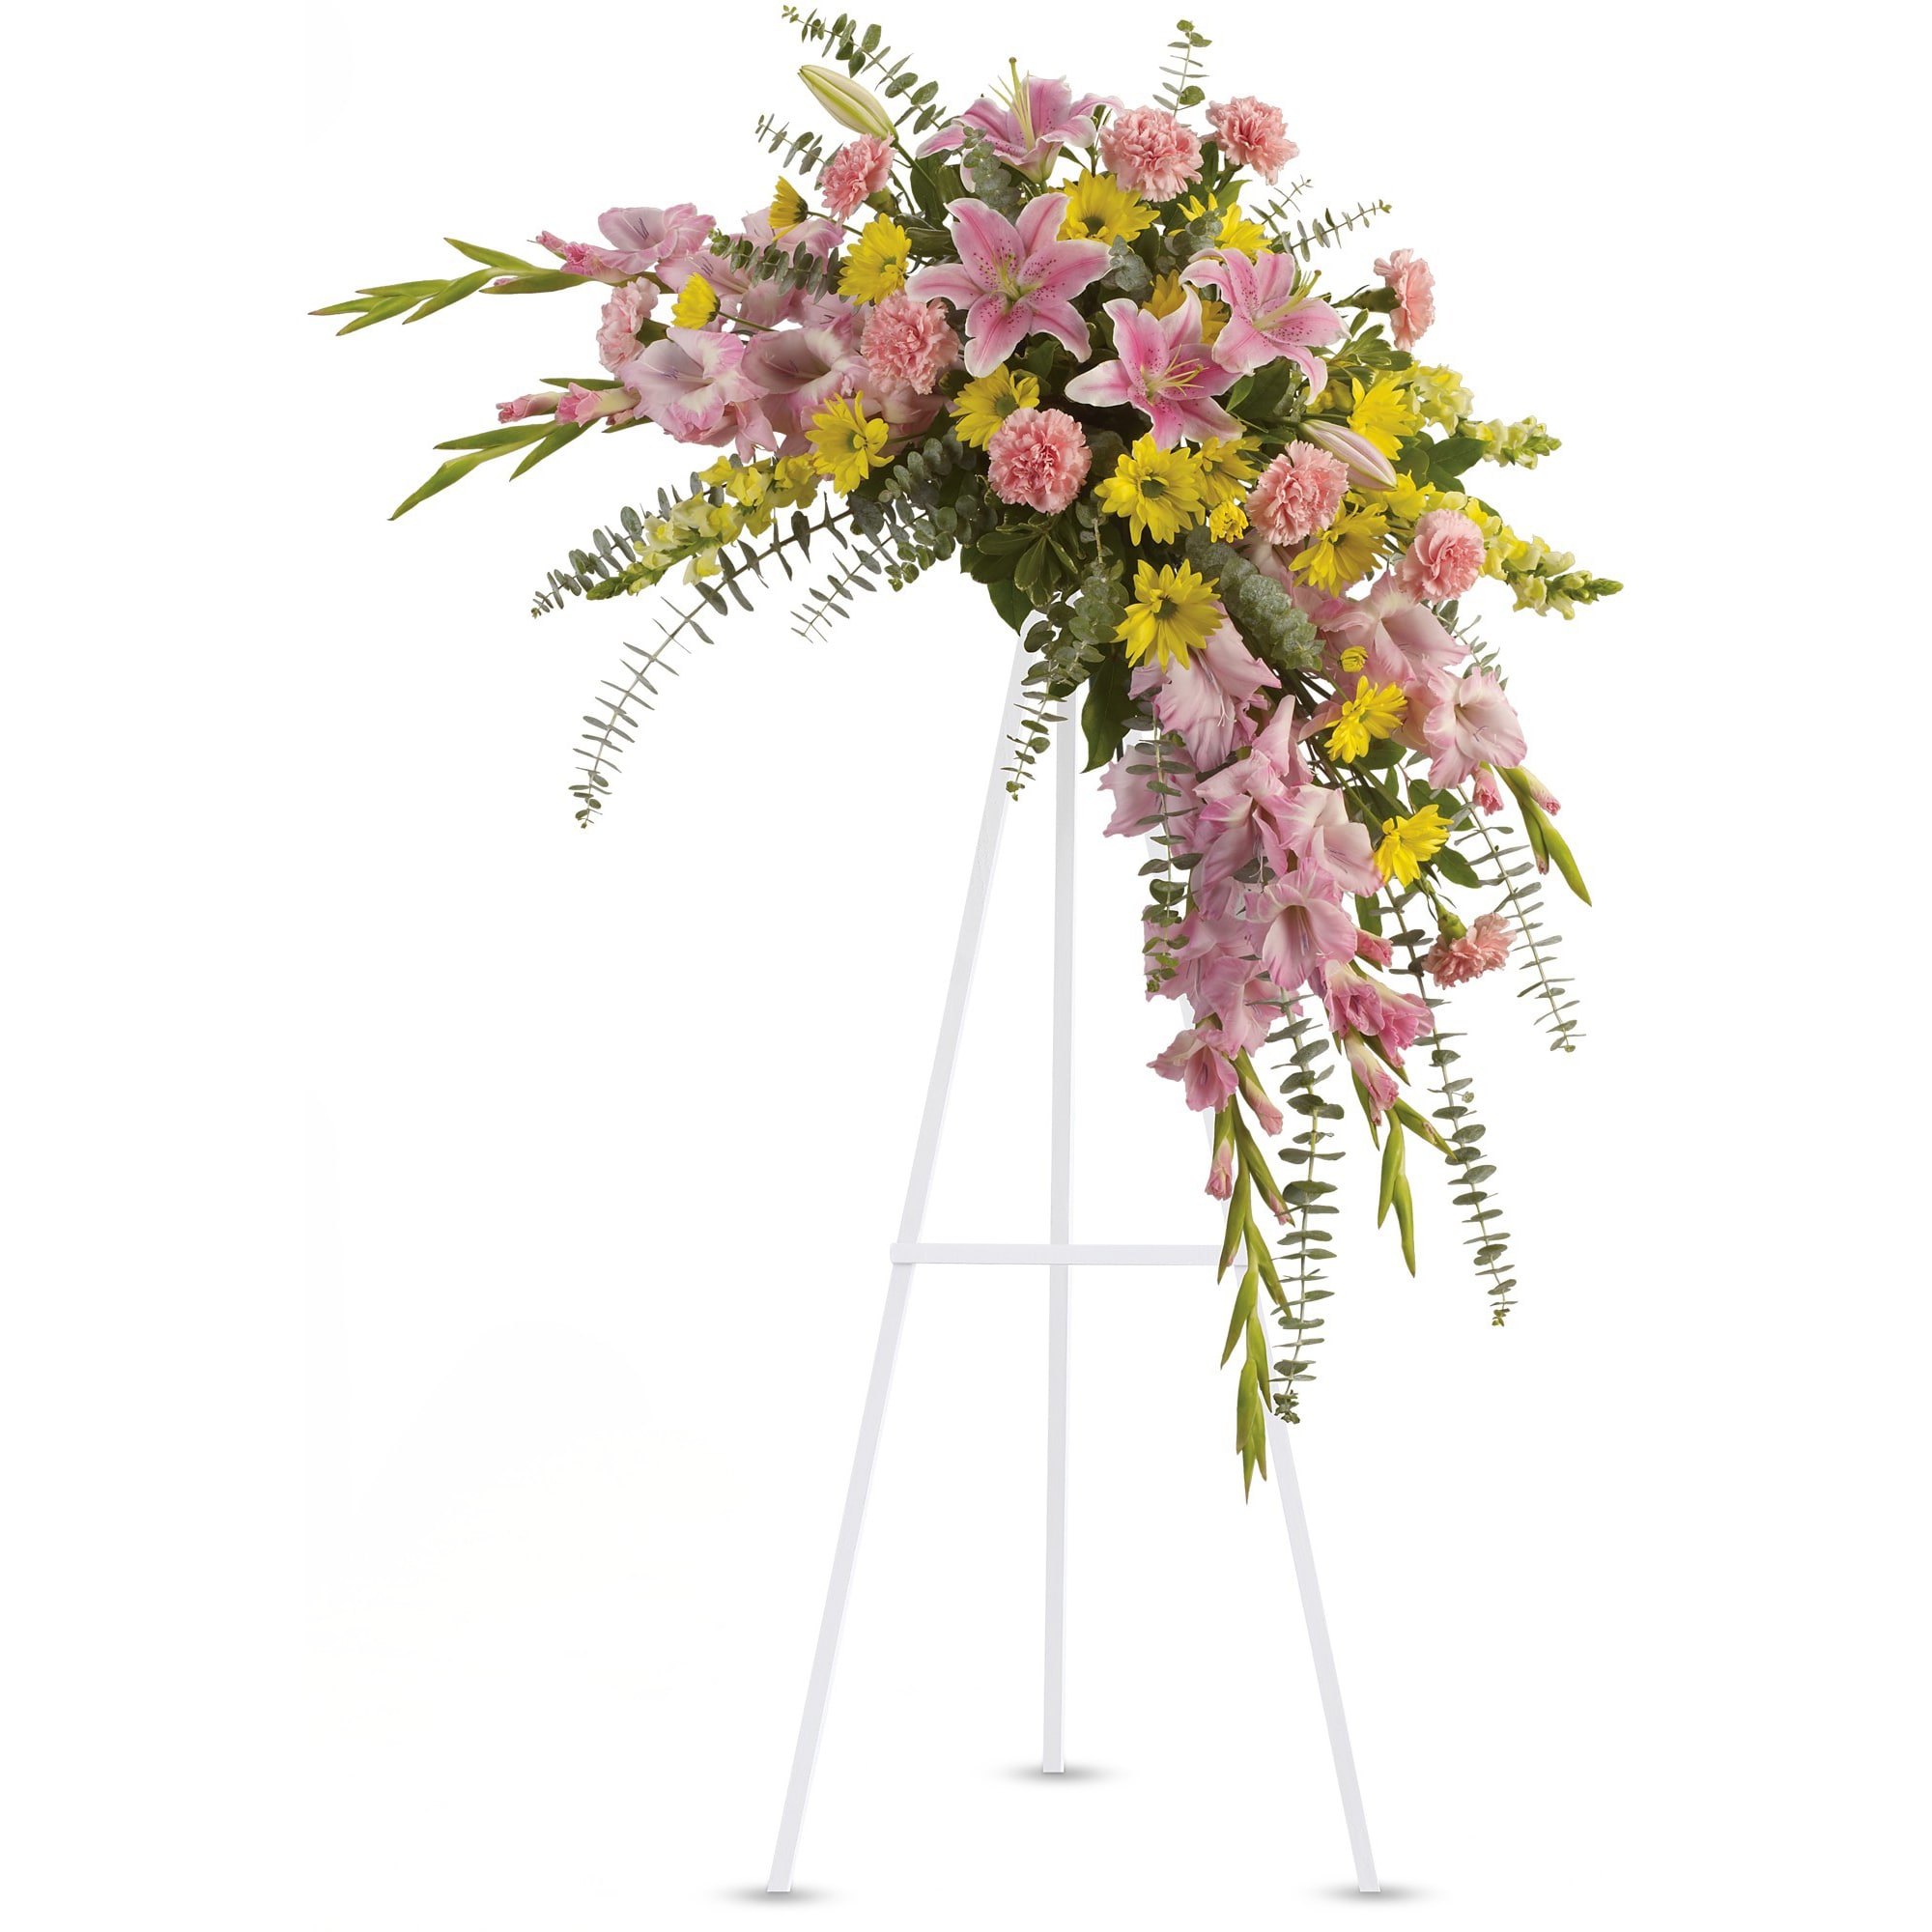 Sweet Solace Spray by Teleflora - Rejoice with this softly dramatic cascade of pink and yellow blooms - lilies, gladioli and chrysanthemums - that has hints of eucalyptus and variegated greens. 